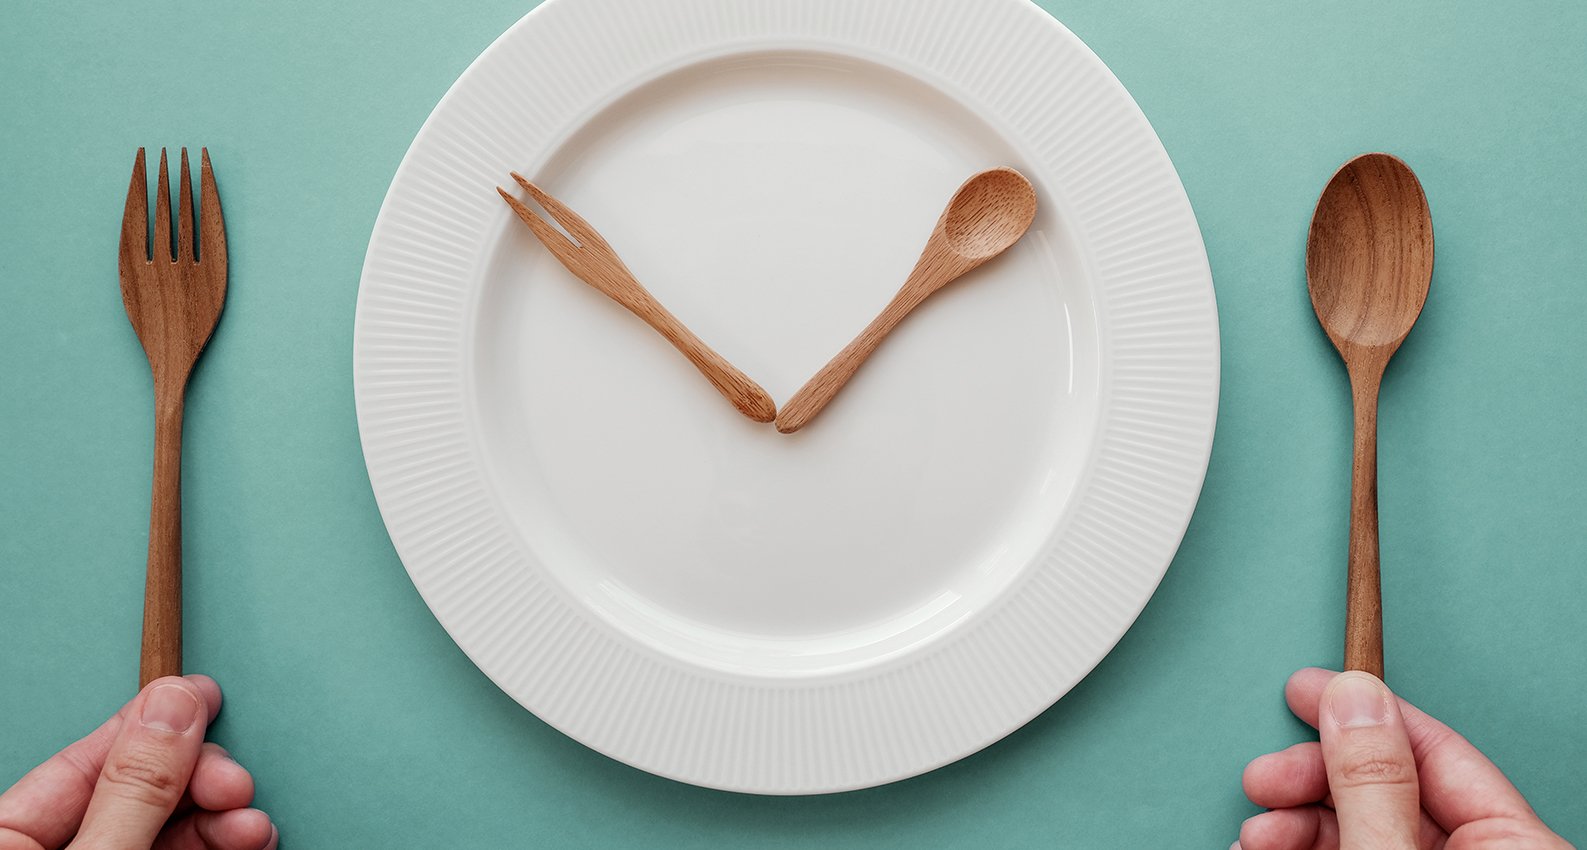 Trending: Autophagy and Intermittent Fasting